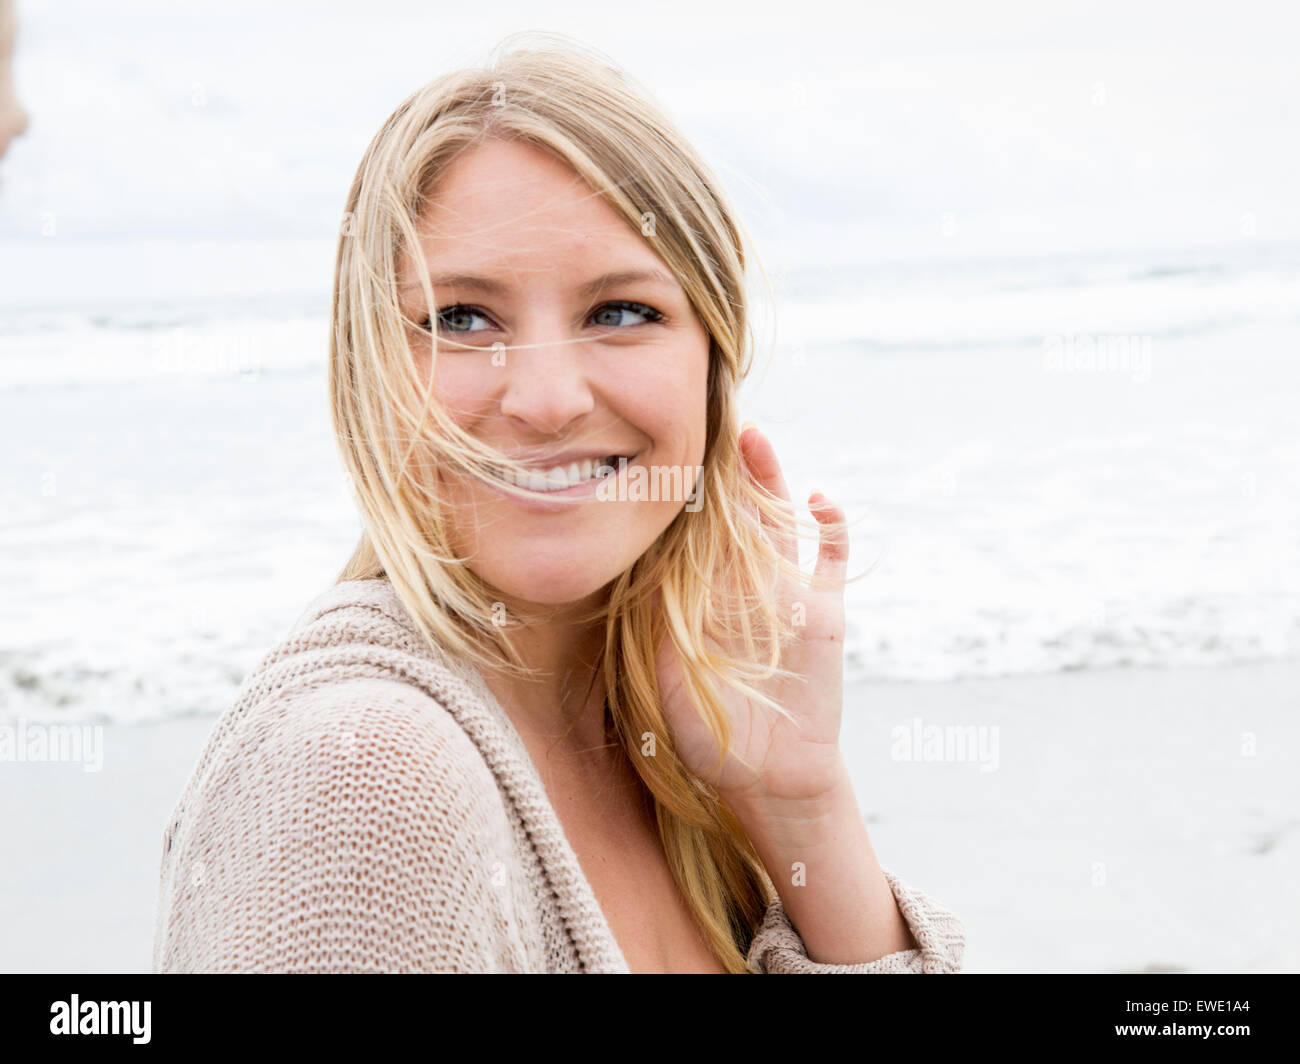 Portrait of a smiling young woman on a beach Banque D'Images